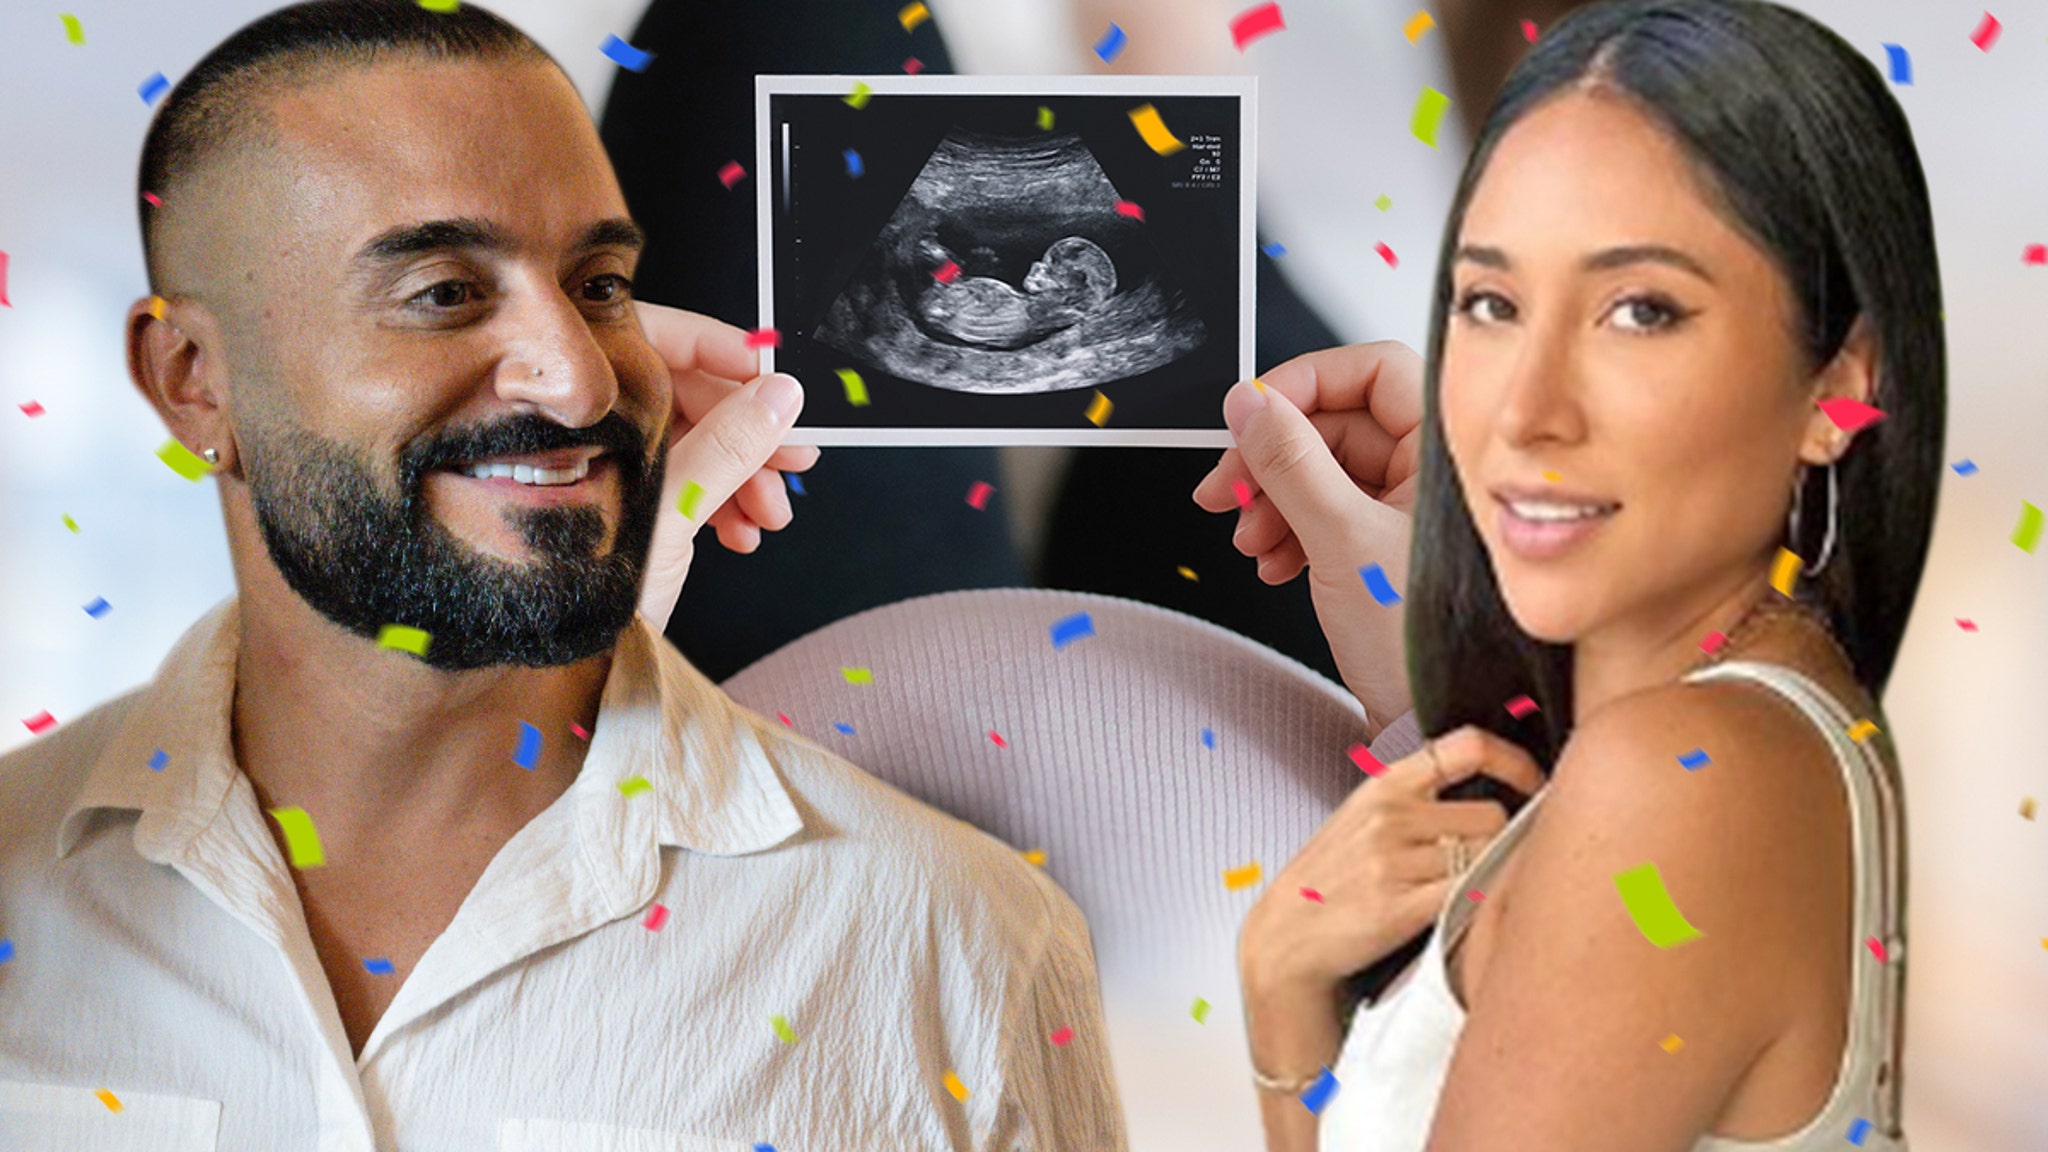 ‘Dubai Bling’ stars Chris Fede, wife Brianna expecting baby after health issues